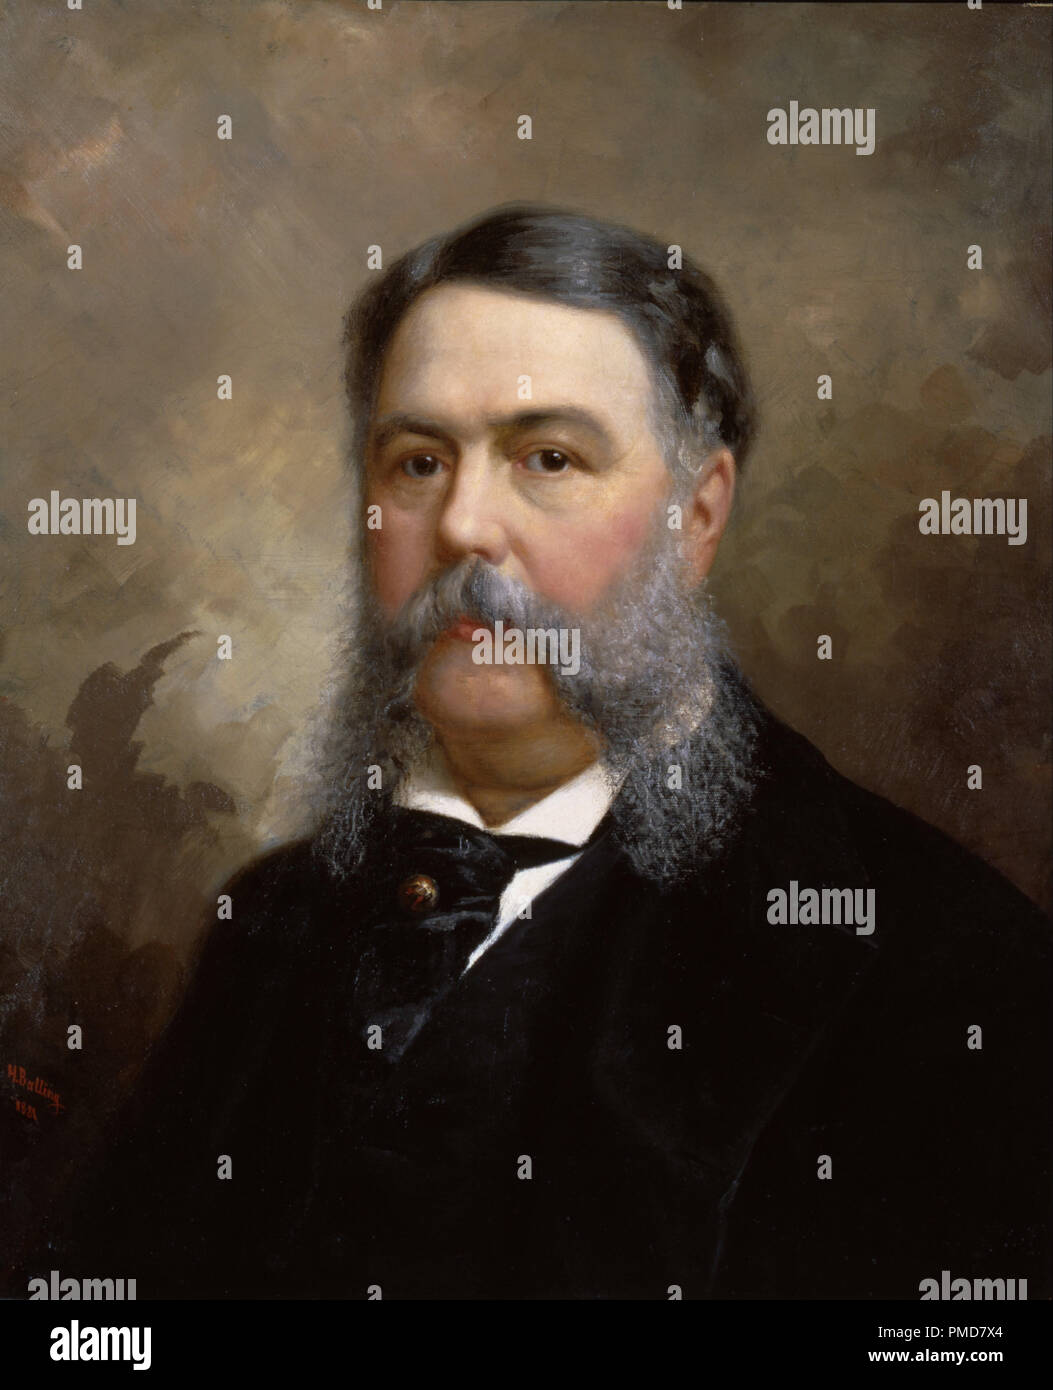 Chester A. Arthur. Date/Period: 1881. Painting. Oil on canvas. Height: 622 mm (24.48 in); Width: 508 mm (20 in). Author: OLE PETER HANSEN BALLING. Stock Photo